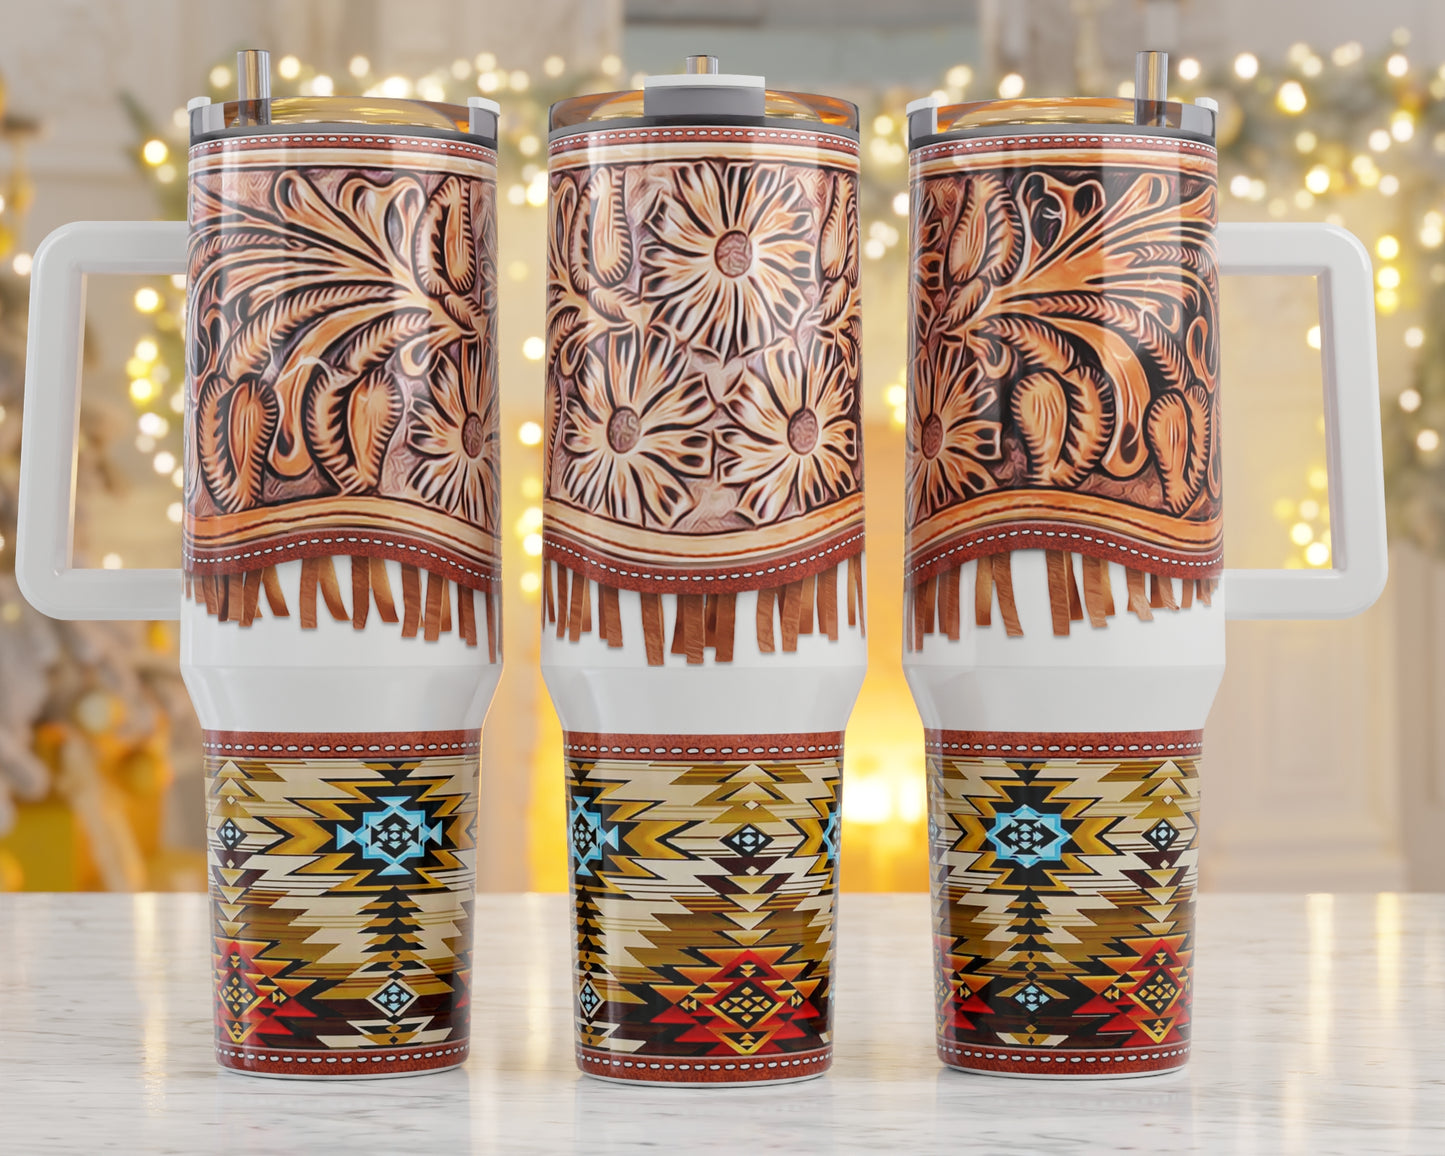 Tulle Leather Look Western Themed 40 oz. Stainless steel tumblers CedarHill Country Market